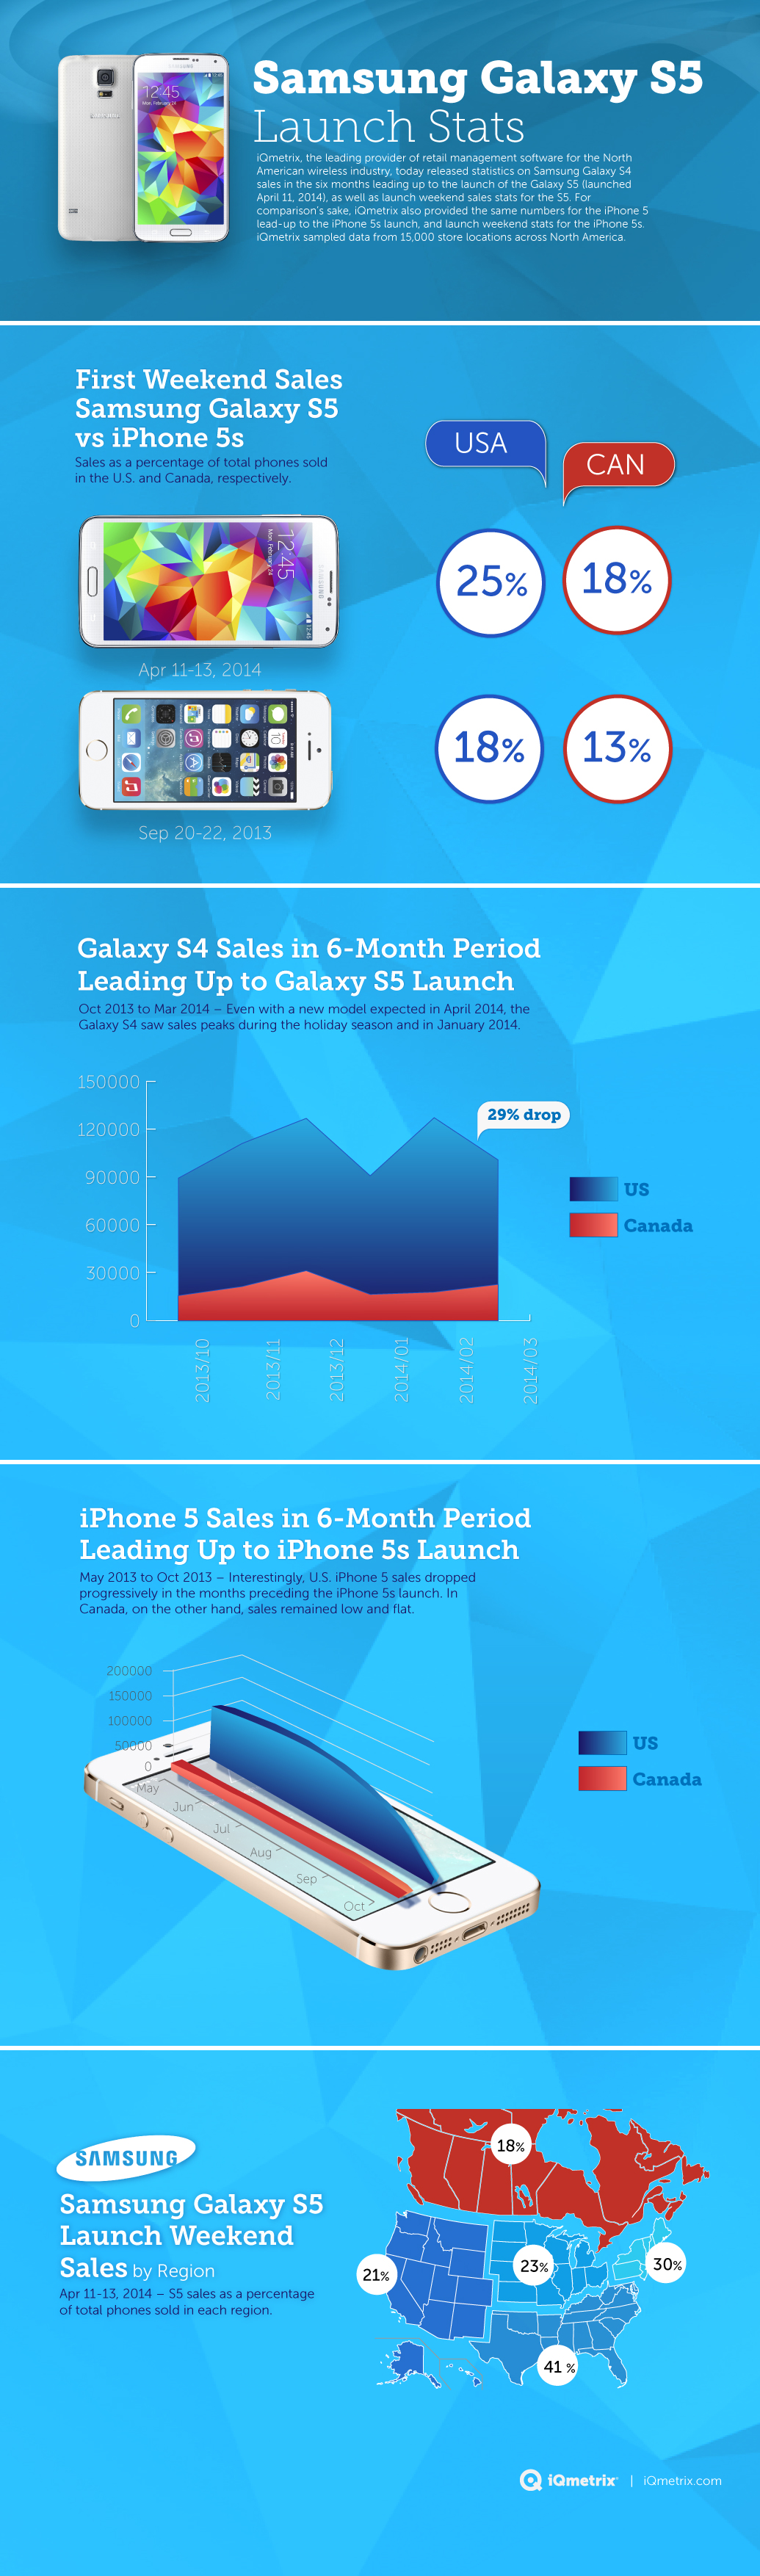 samsung_galaxys5_infographic